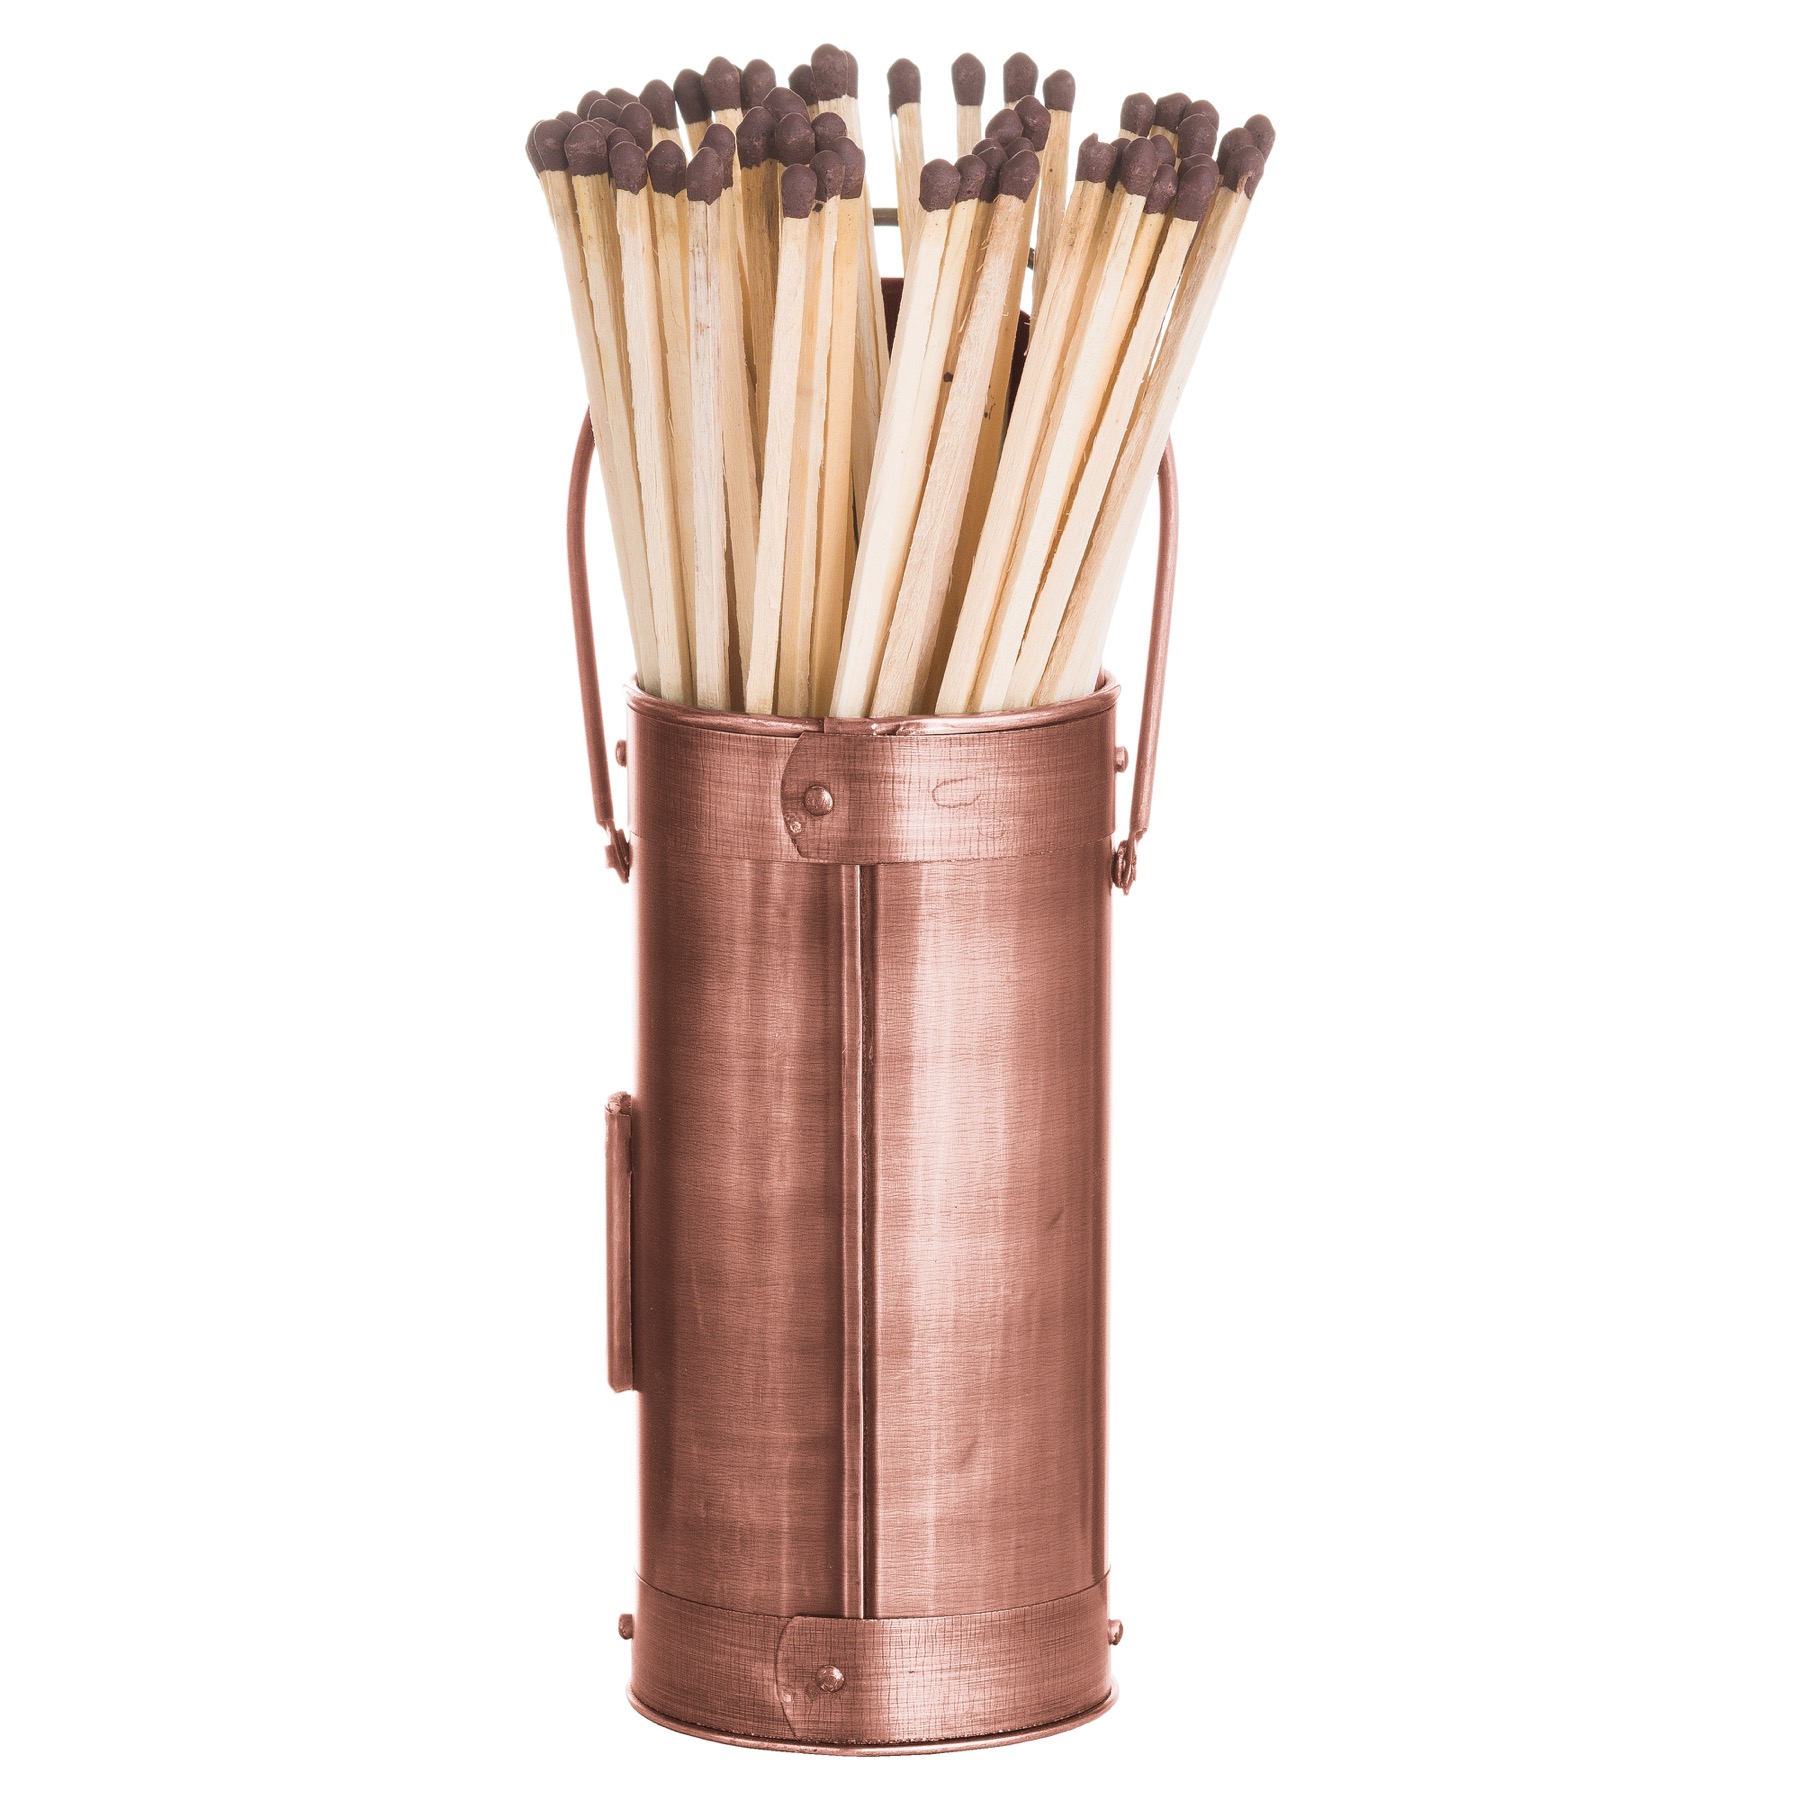 Copper Match Holder With 60 Matches - Image 2